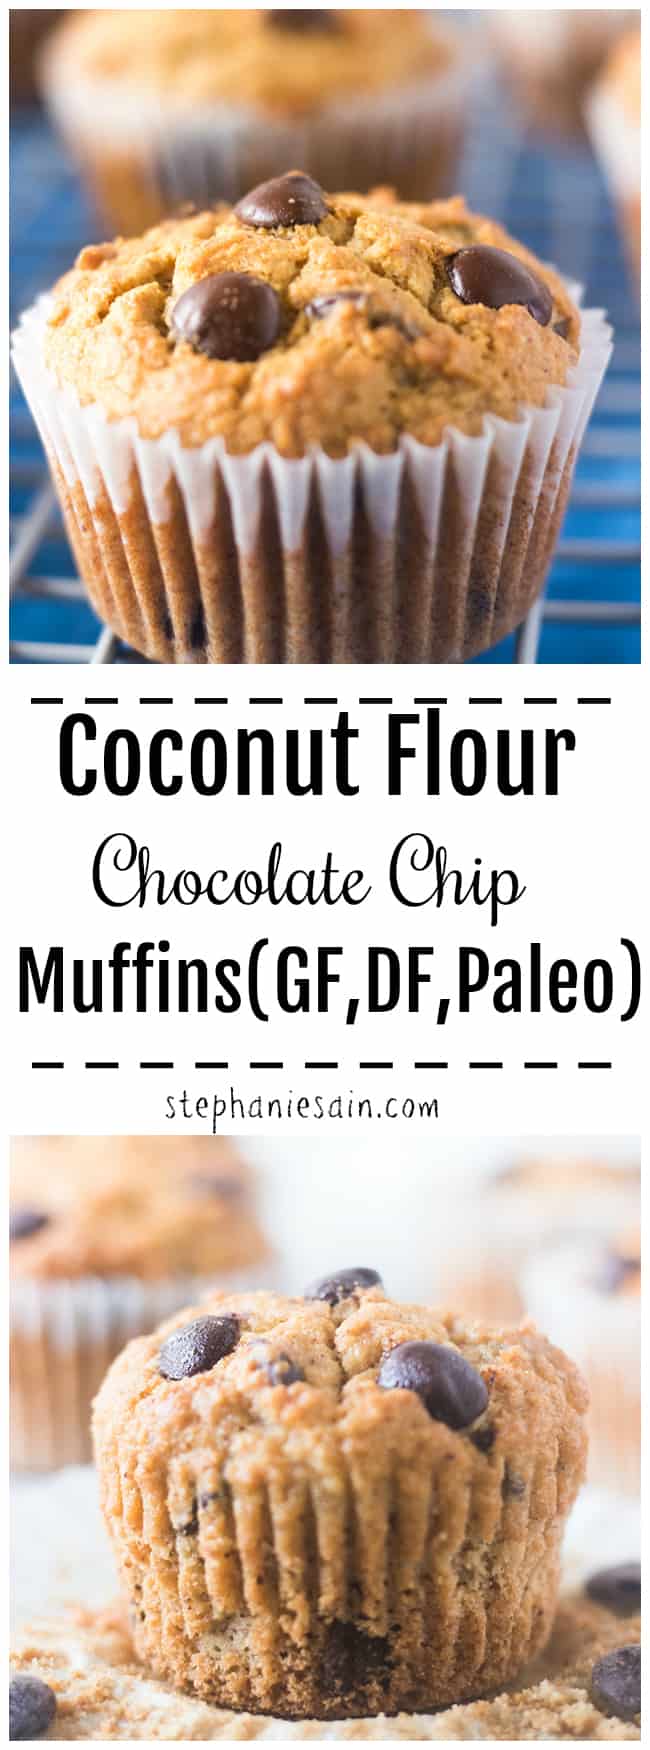 These Coconut Flour Chocolate Chip muffins are healthy, moist, tender muffins loaded with chocolate chips. Perfect for a grab & go breakfast or snack. Gluten Free, Dairy Free & No Added Refined Sugars.